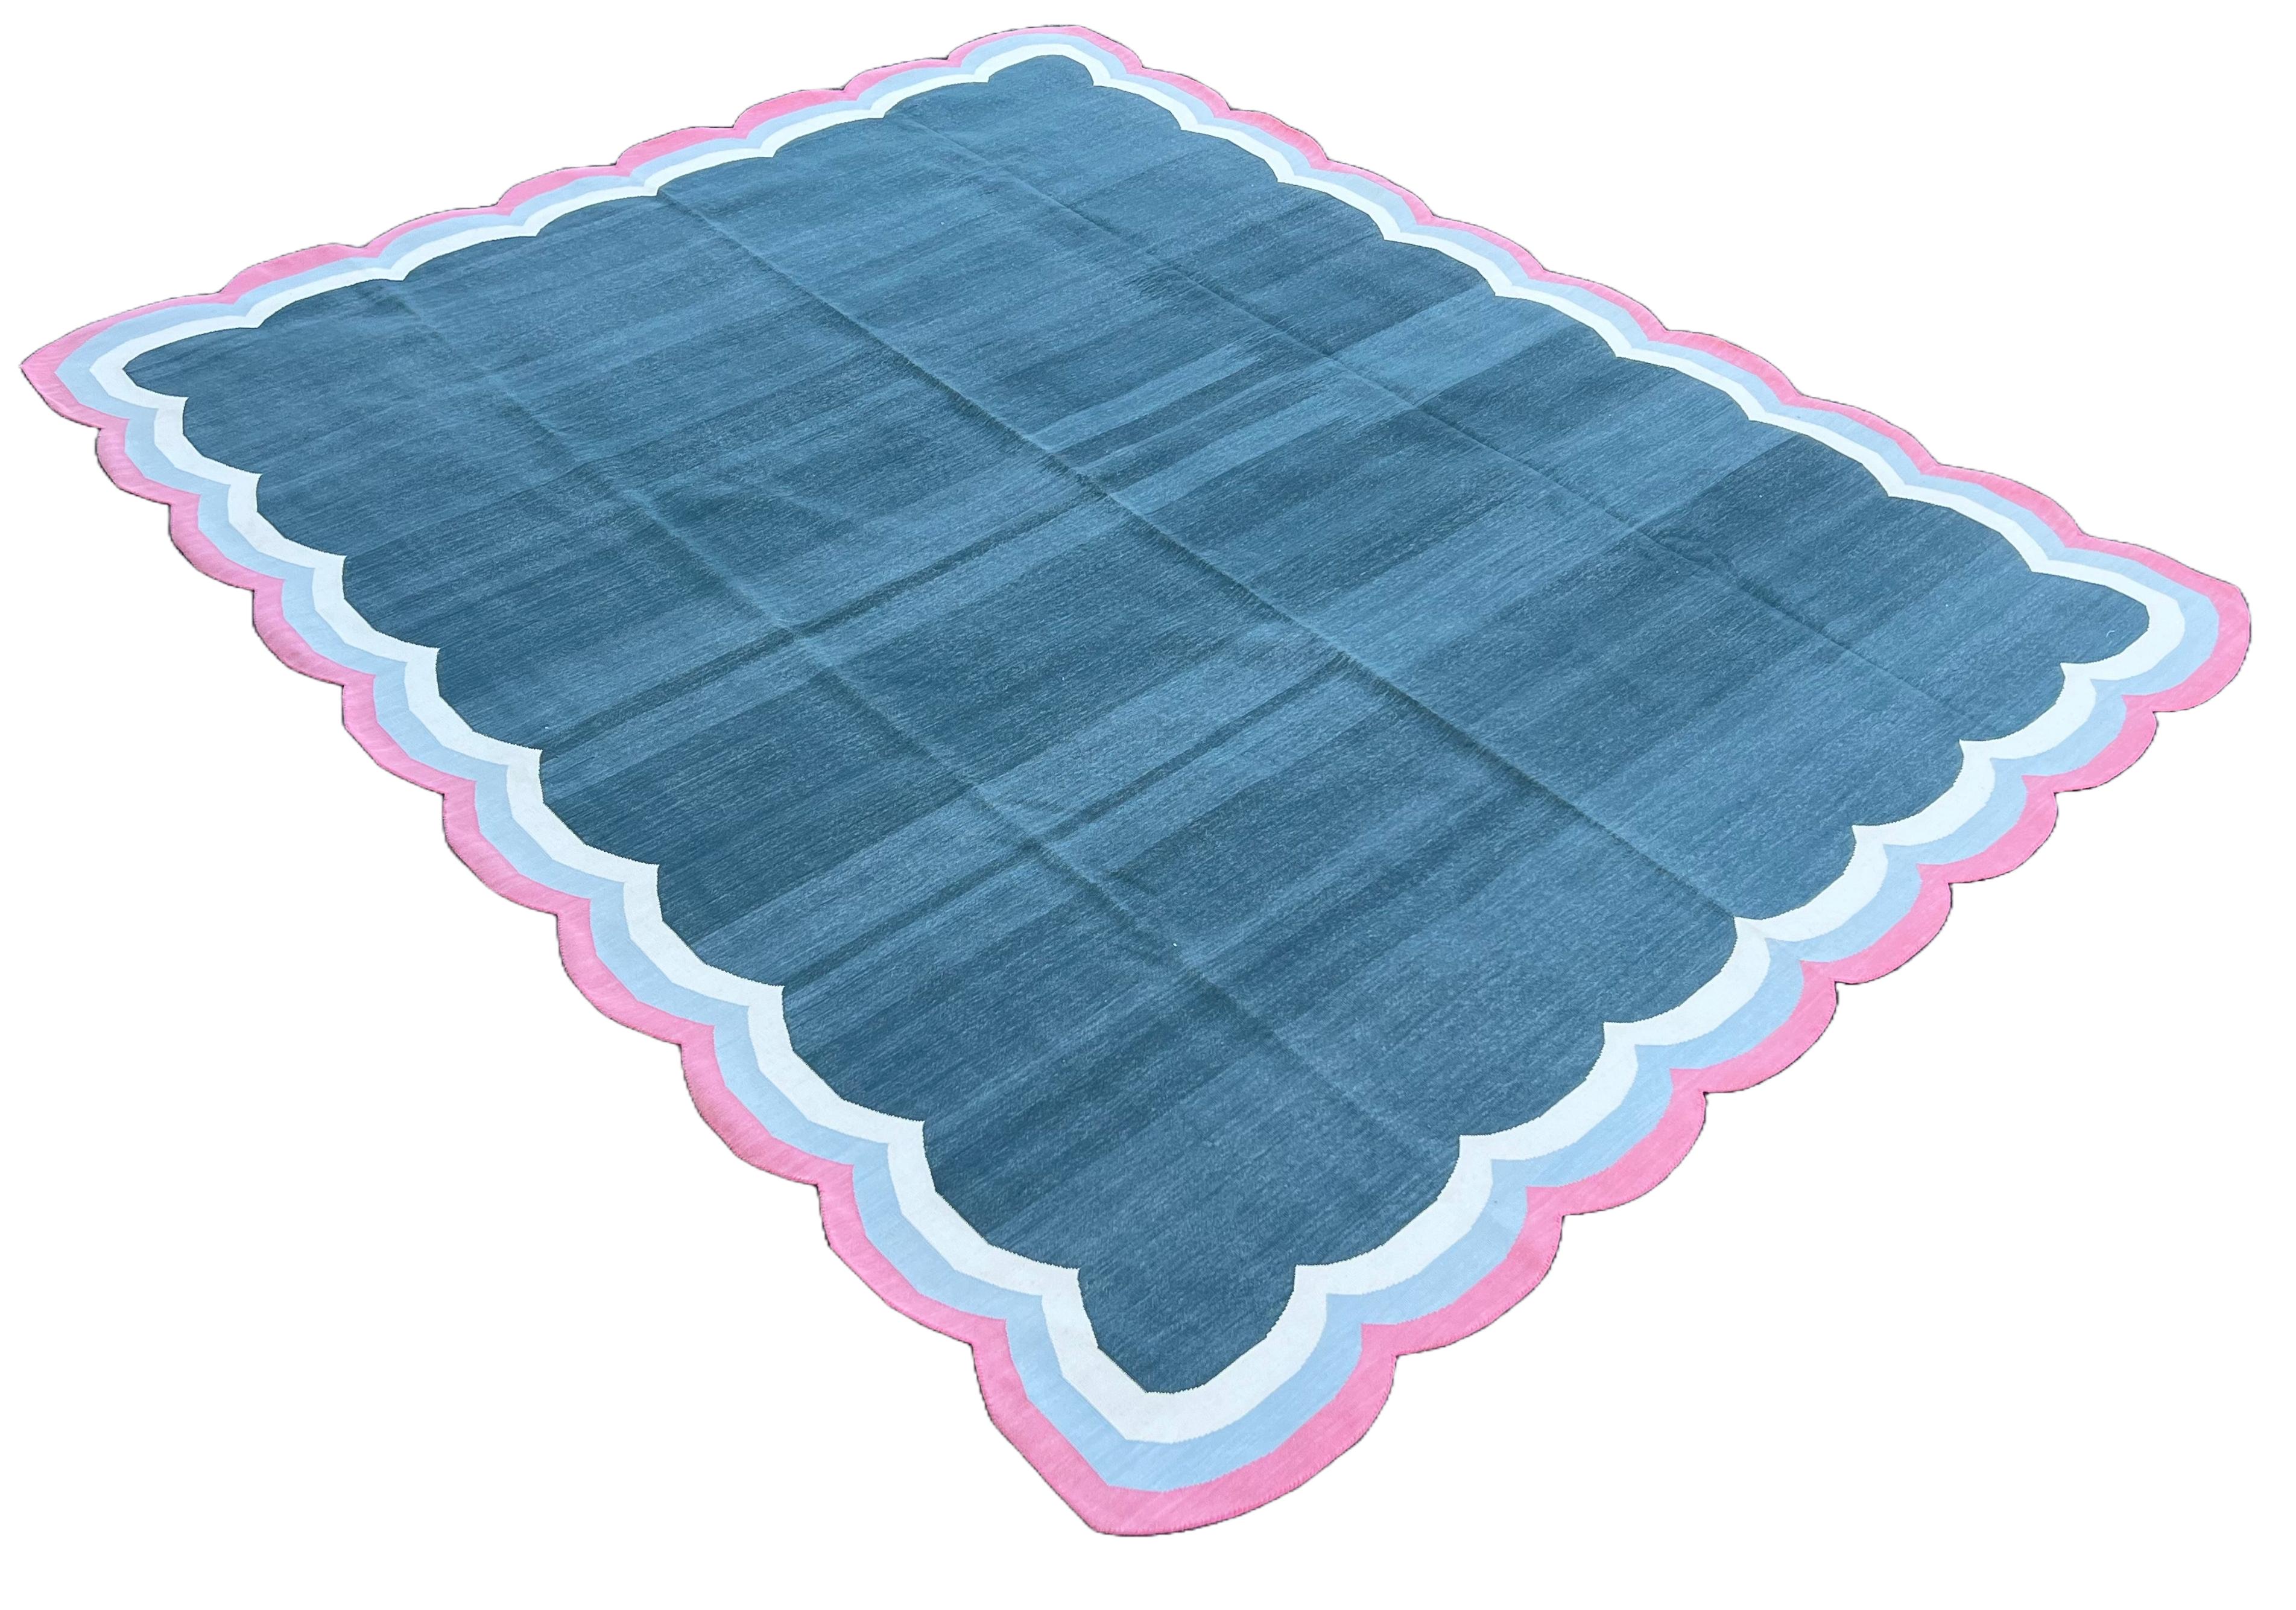 Cotton Vegetable Dyed Blue, Cream, Sky Blue And Pink Four Sided Scalloped Rug-8'x10' 
(Scallops runs all four Sides)
These special flat-weave dhurries are hand-woven with 15 ply 100% cotton yarn. Due to the special manufacturing techniques used to